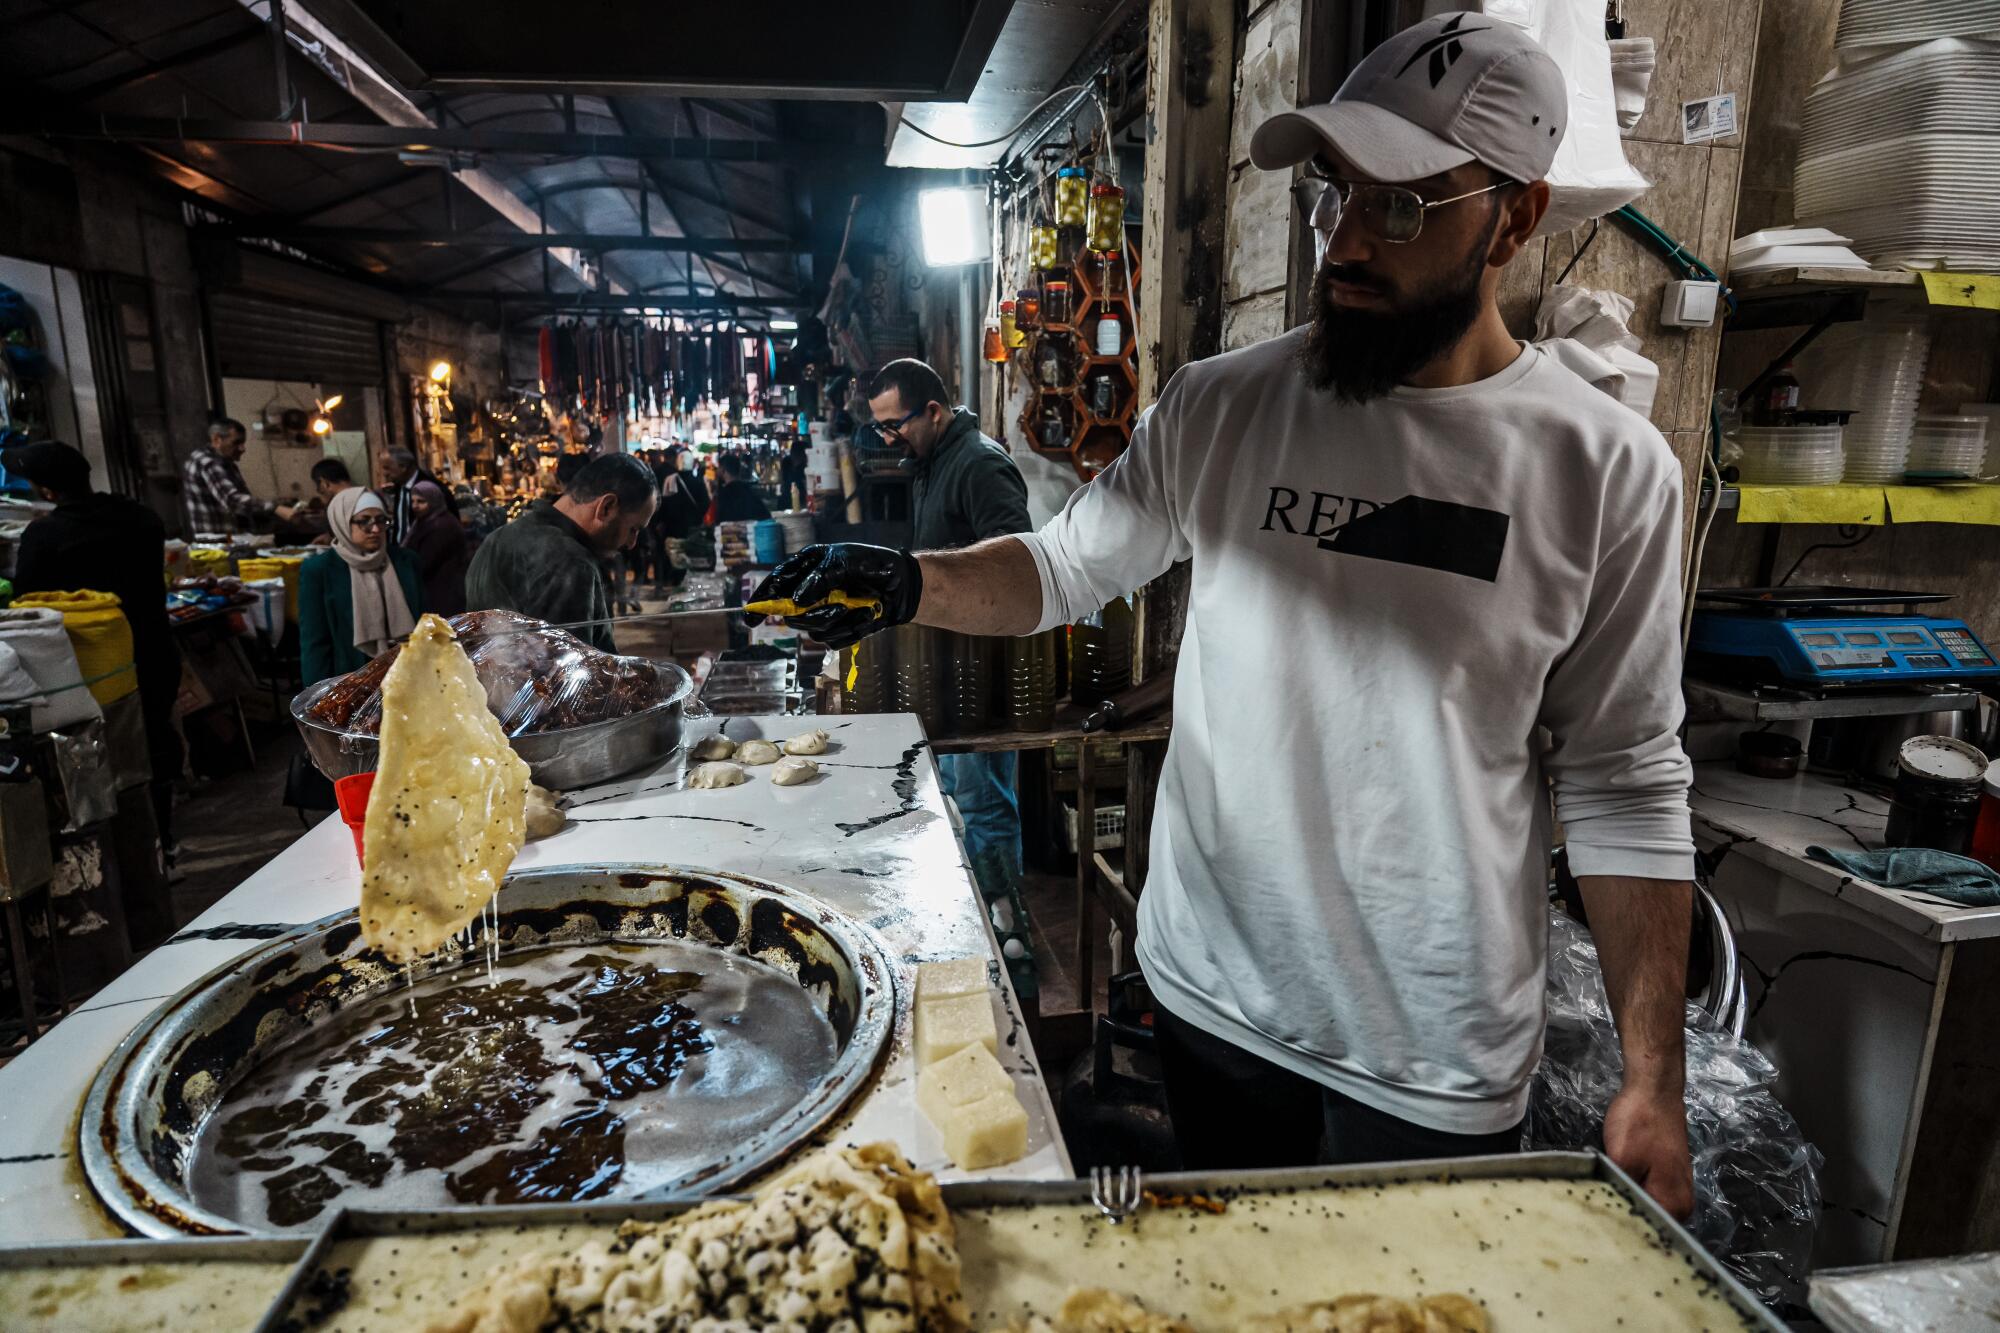 Man cooking dough for a dessert in Nablus, West Bank